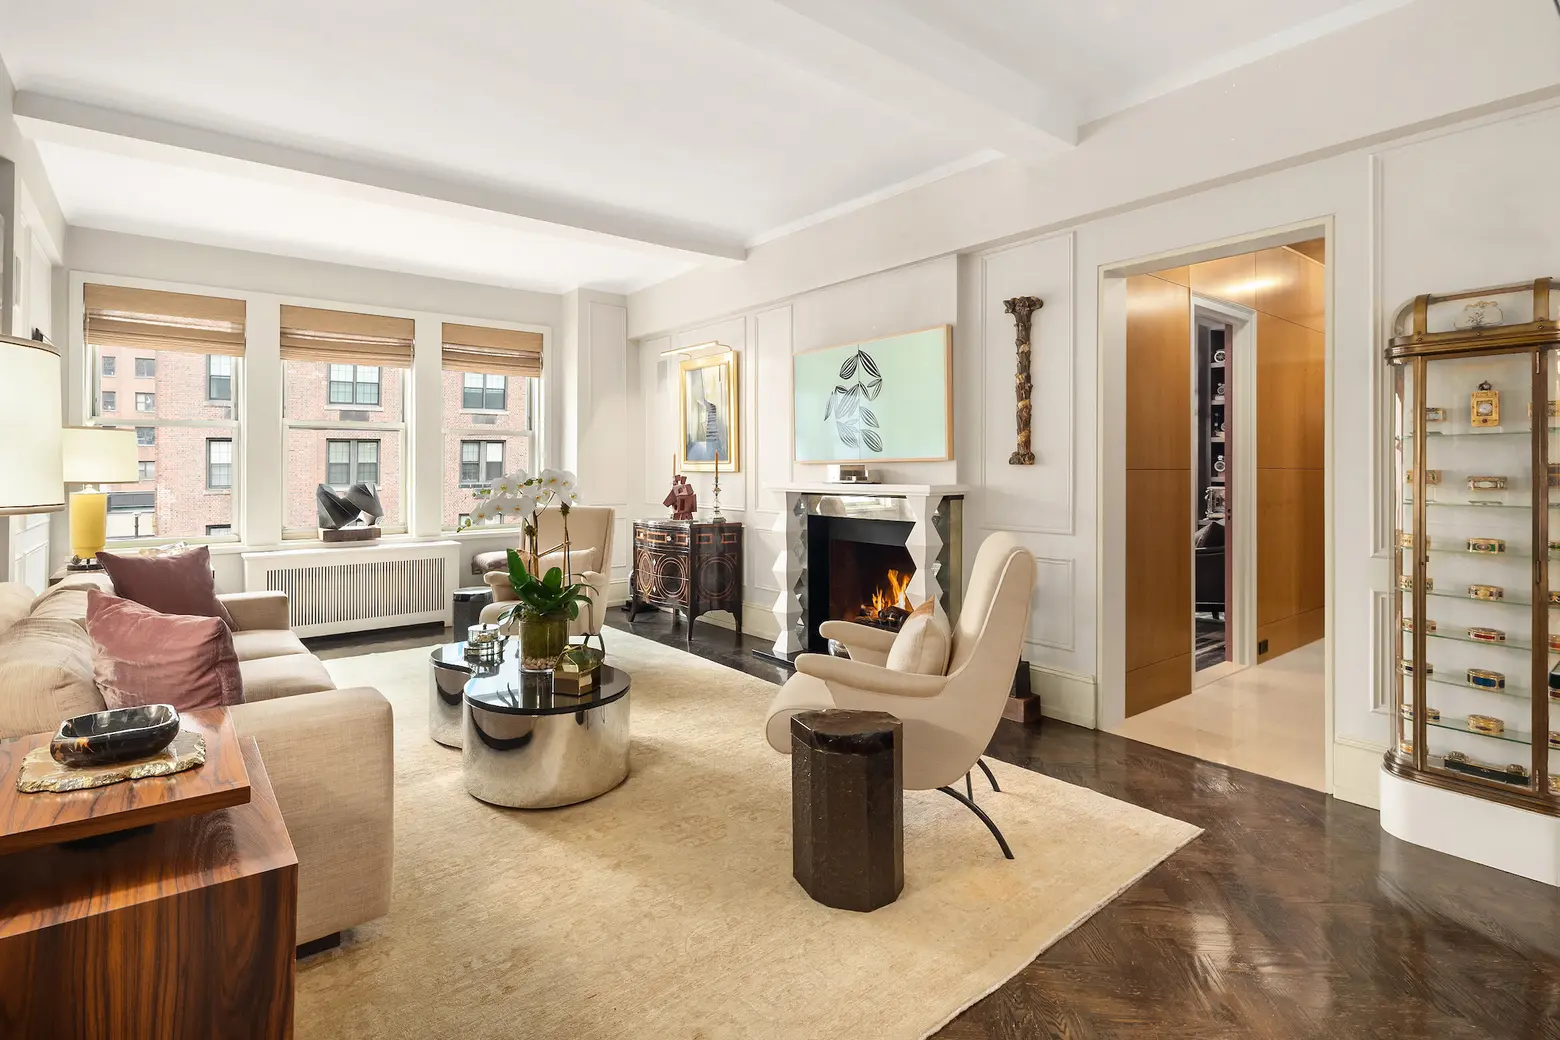 In the exclusive enclave of Sutton Place, an elegant co-op with extra space asks $1.9M